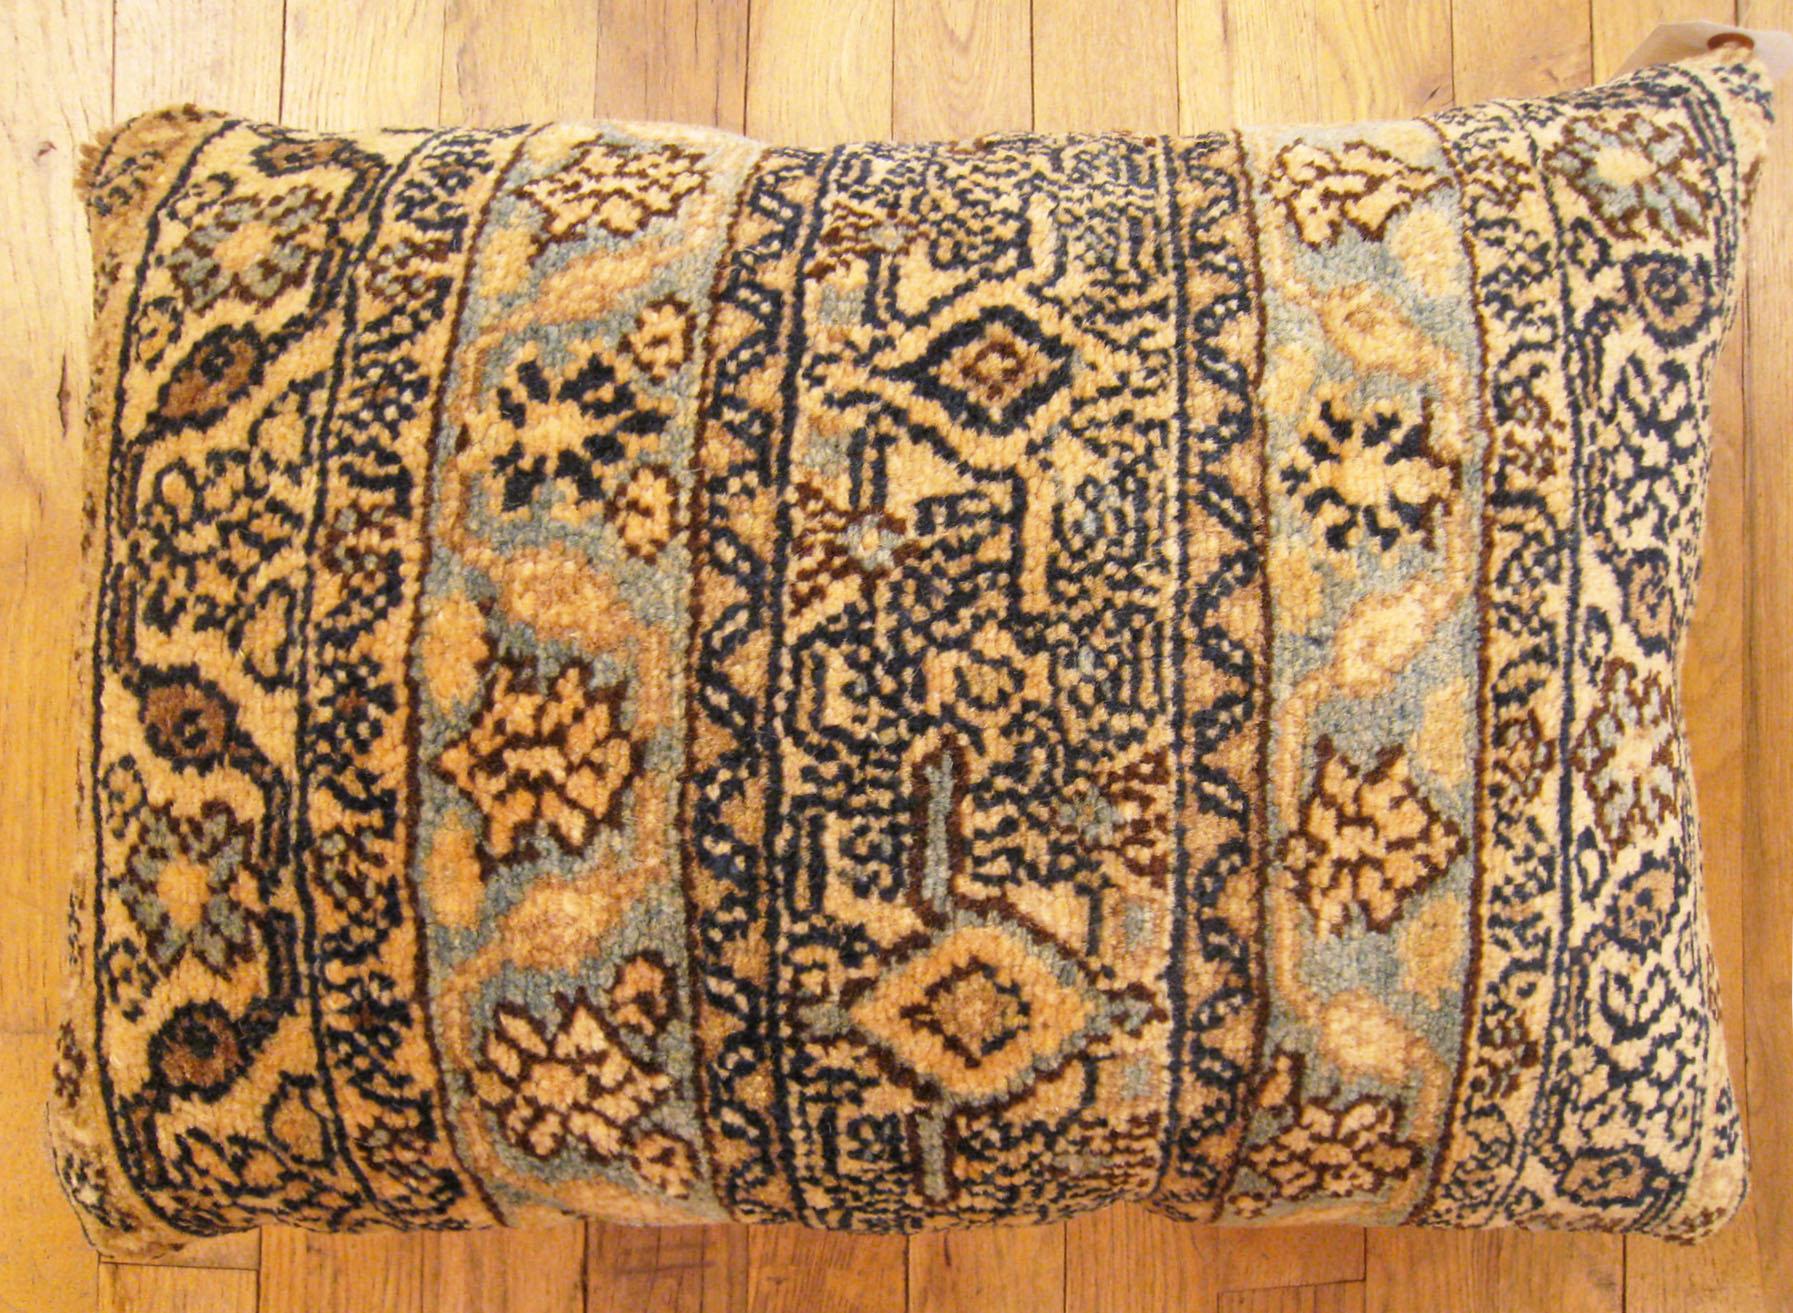 Antique Persian hamadan rug pillow; size 2'0” x 1'6”.

An antique decorative pillow with floral elements allover a beige central field, size 2'0” x 1'6”. This lovely decorative pillow features an antique fabric of a Hamadan rug on front which is